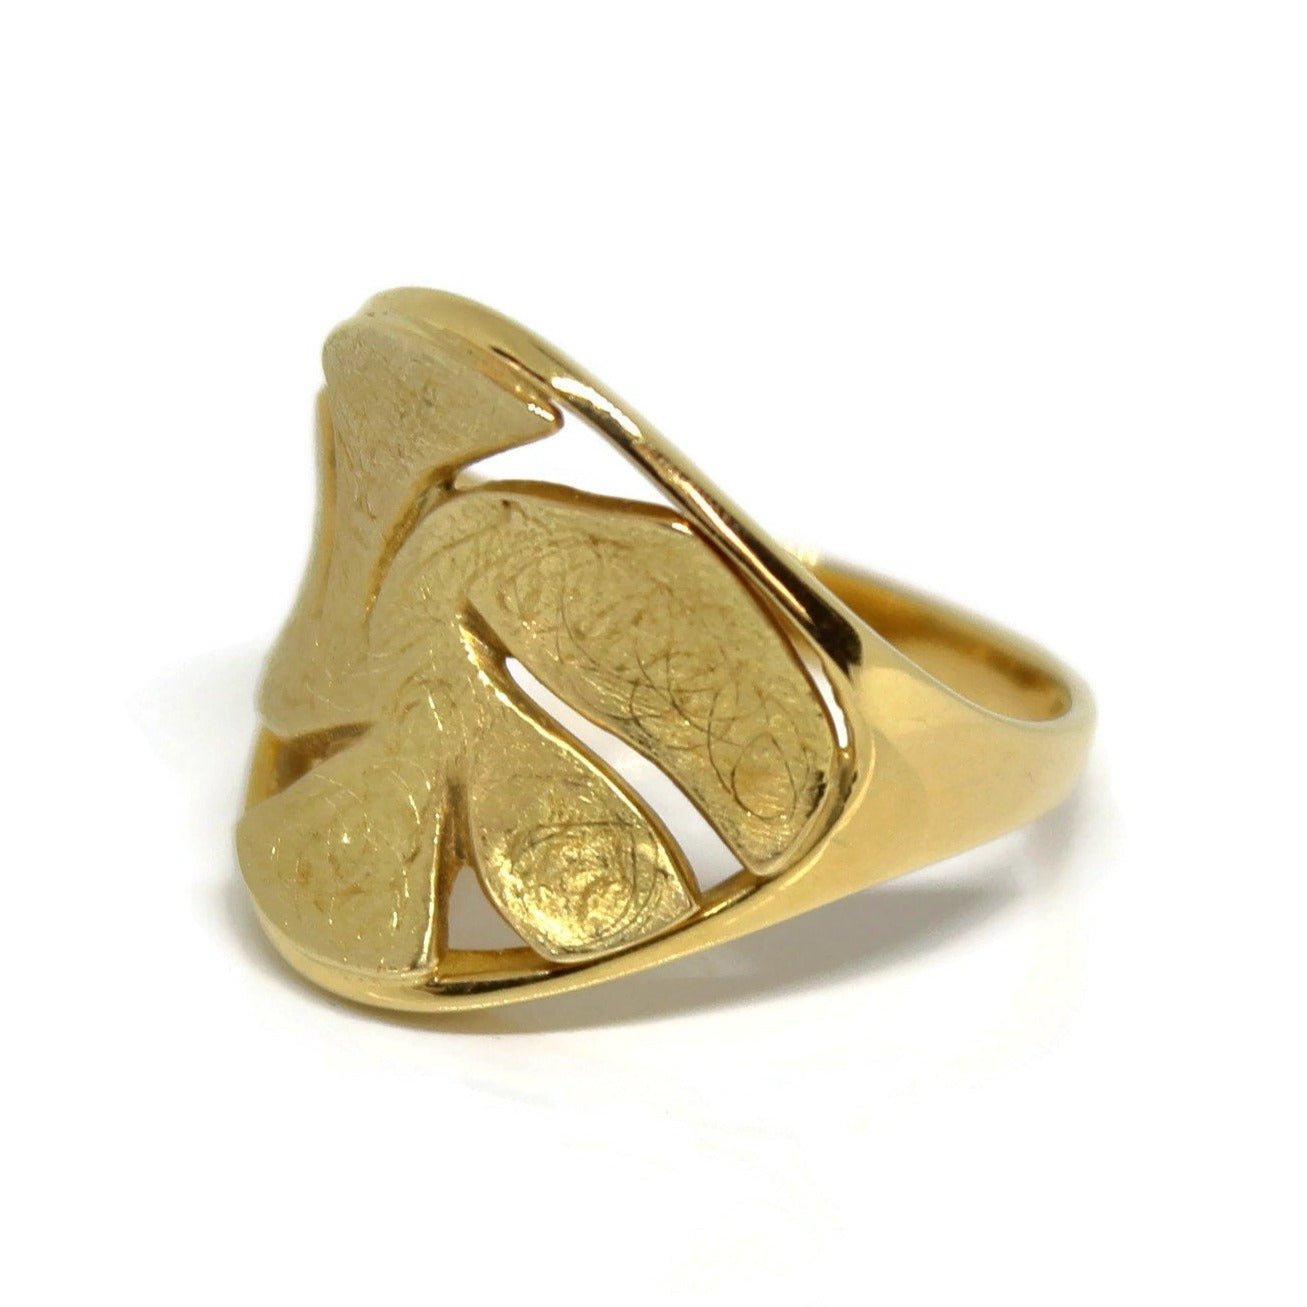 18k Yellow Gold Ring, the top has a matte finish surrounded by brilliant shiny gold - R. Mouzannar Jewelry